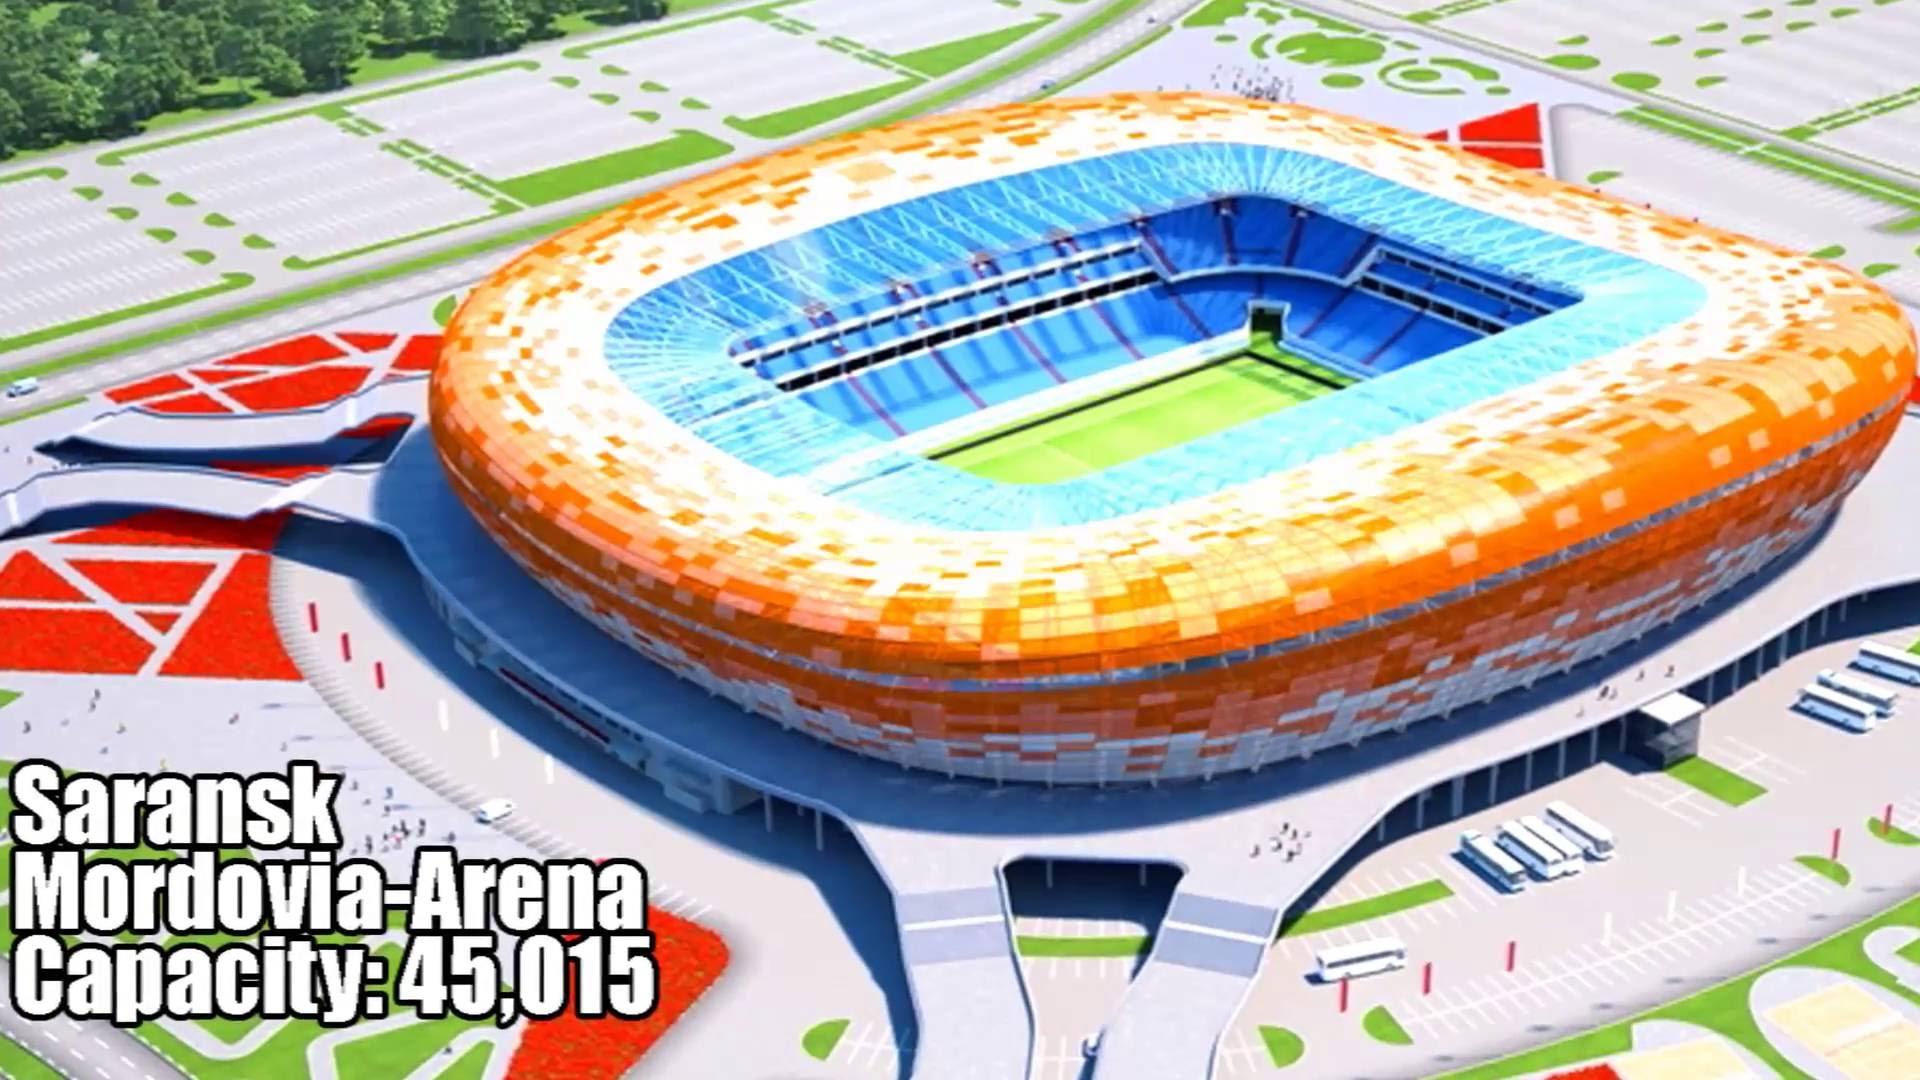 FIFA World Cup venue and Stadiums